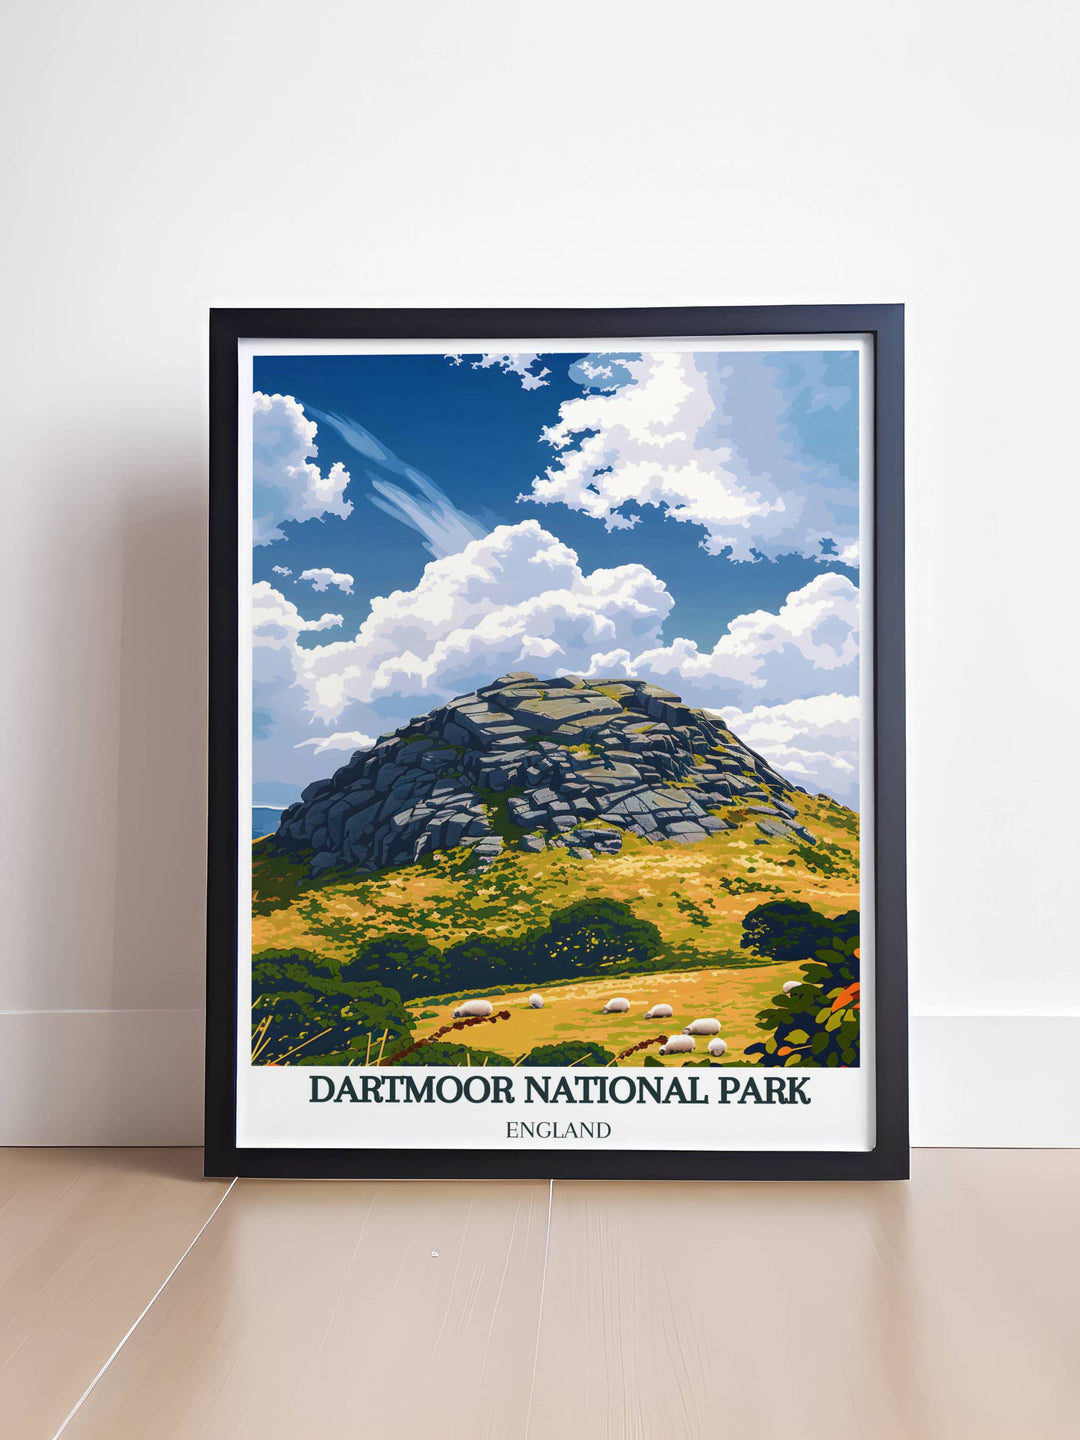 Elegant Dartmoor print of Haytors iconic rock formations, meticulously captured to bring the rugged charm of Dartmoor National Park into your home or workspace